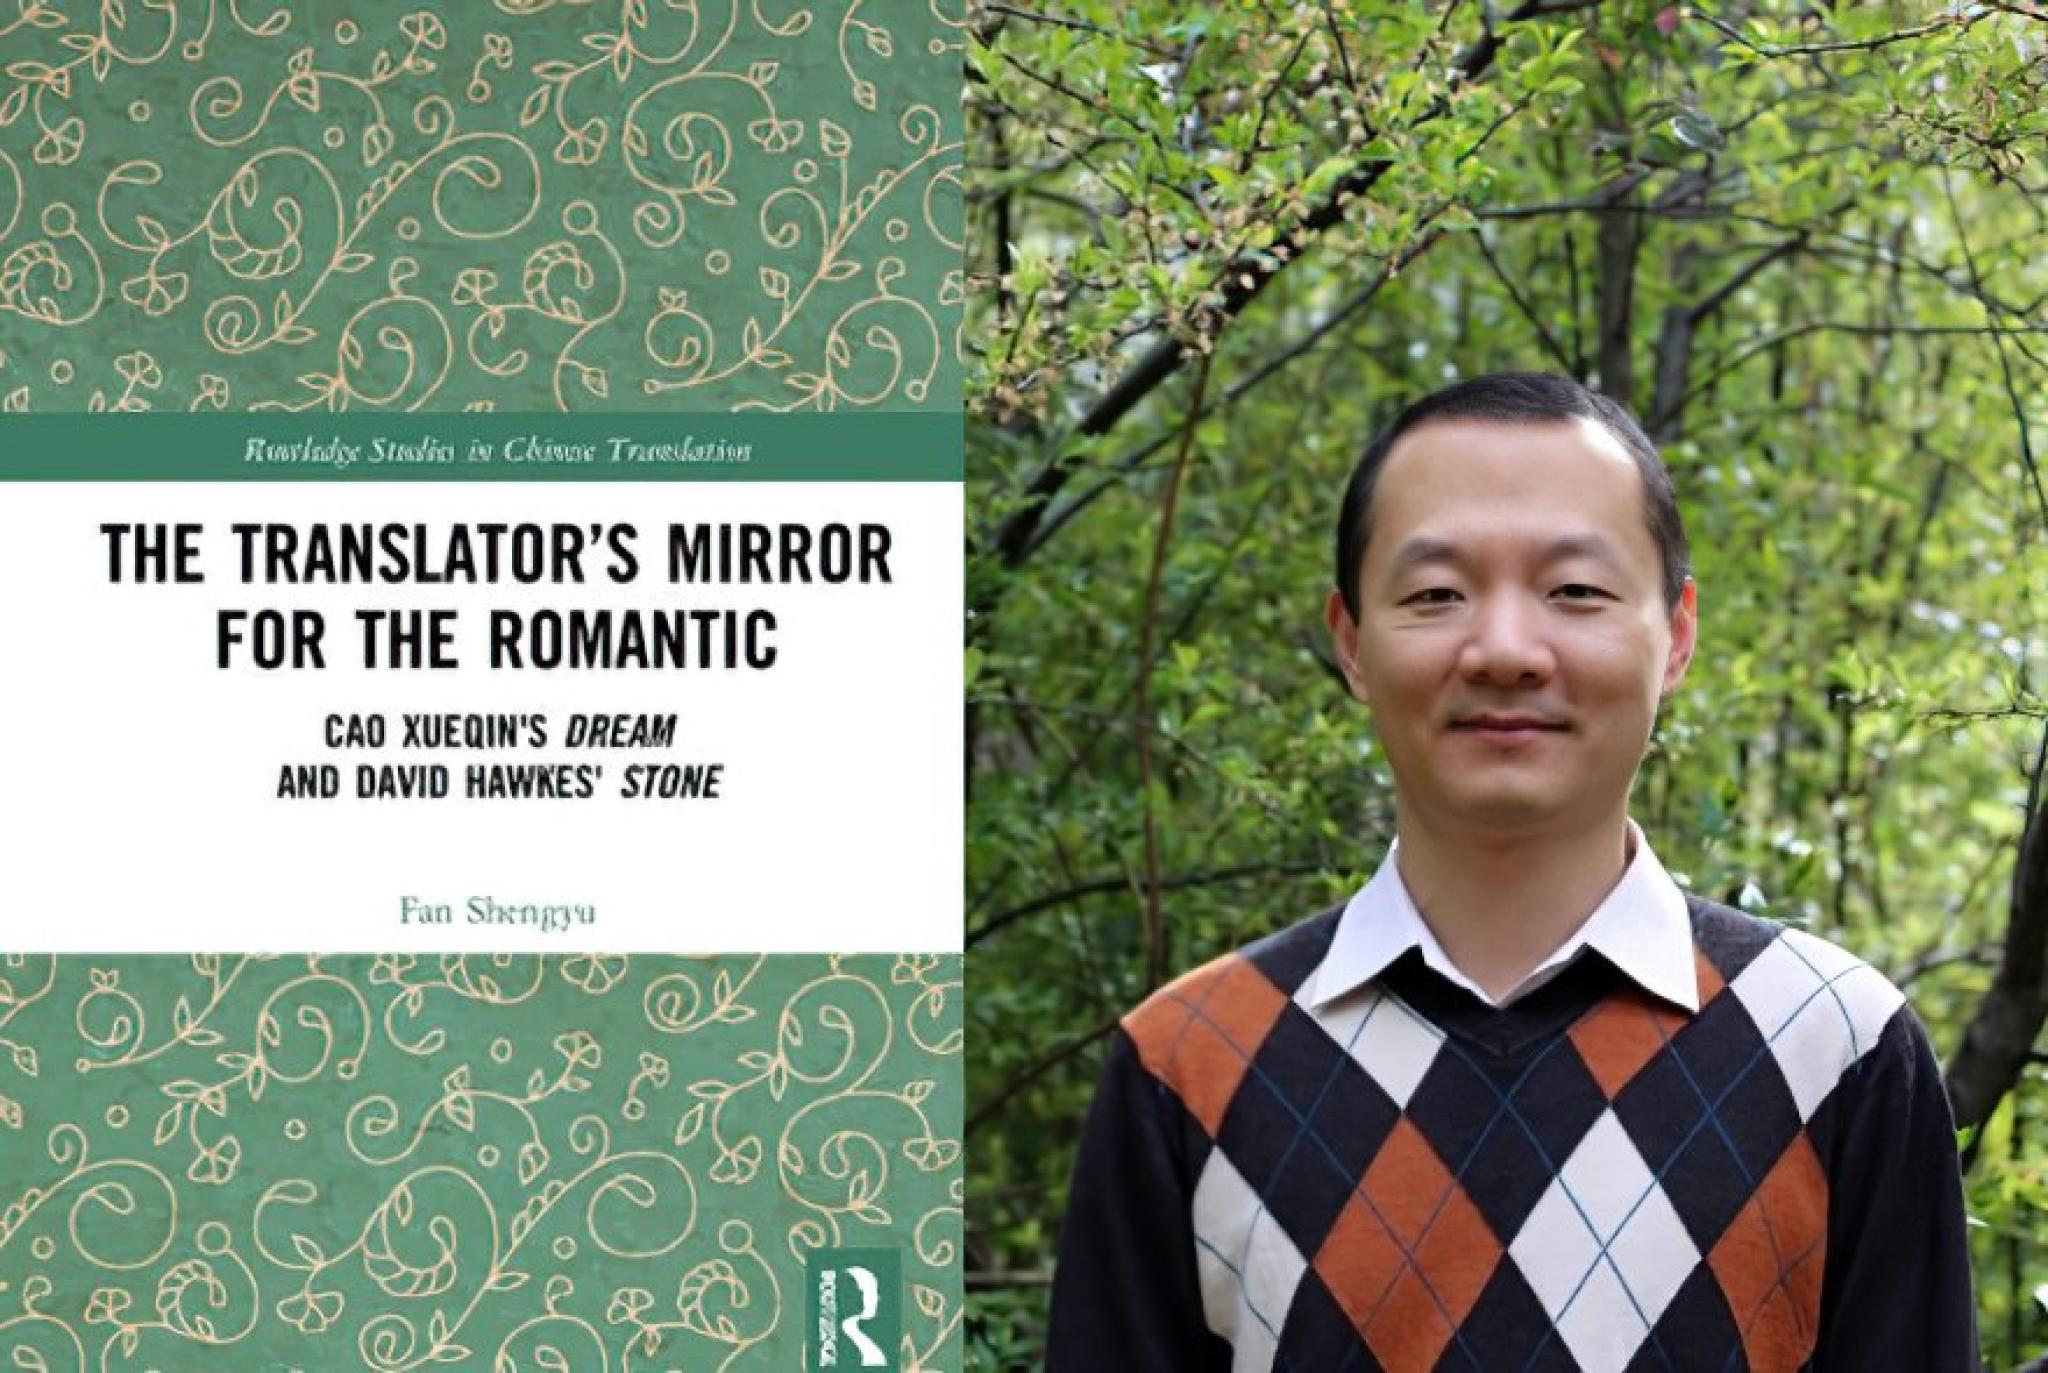 The Translators Mirror For the Romantic book cover on left. Author portrait on right